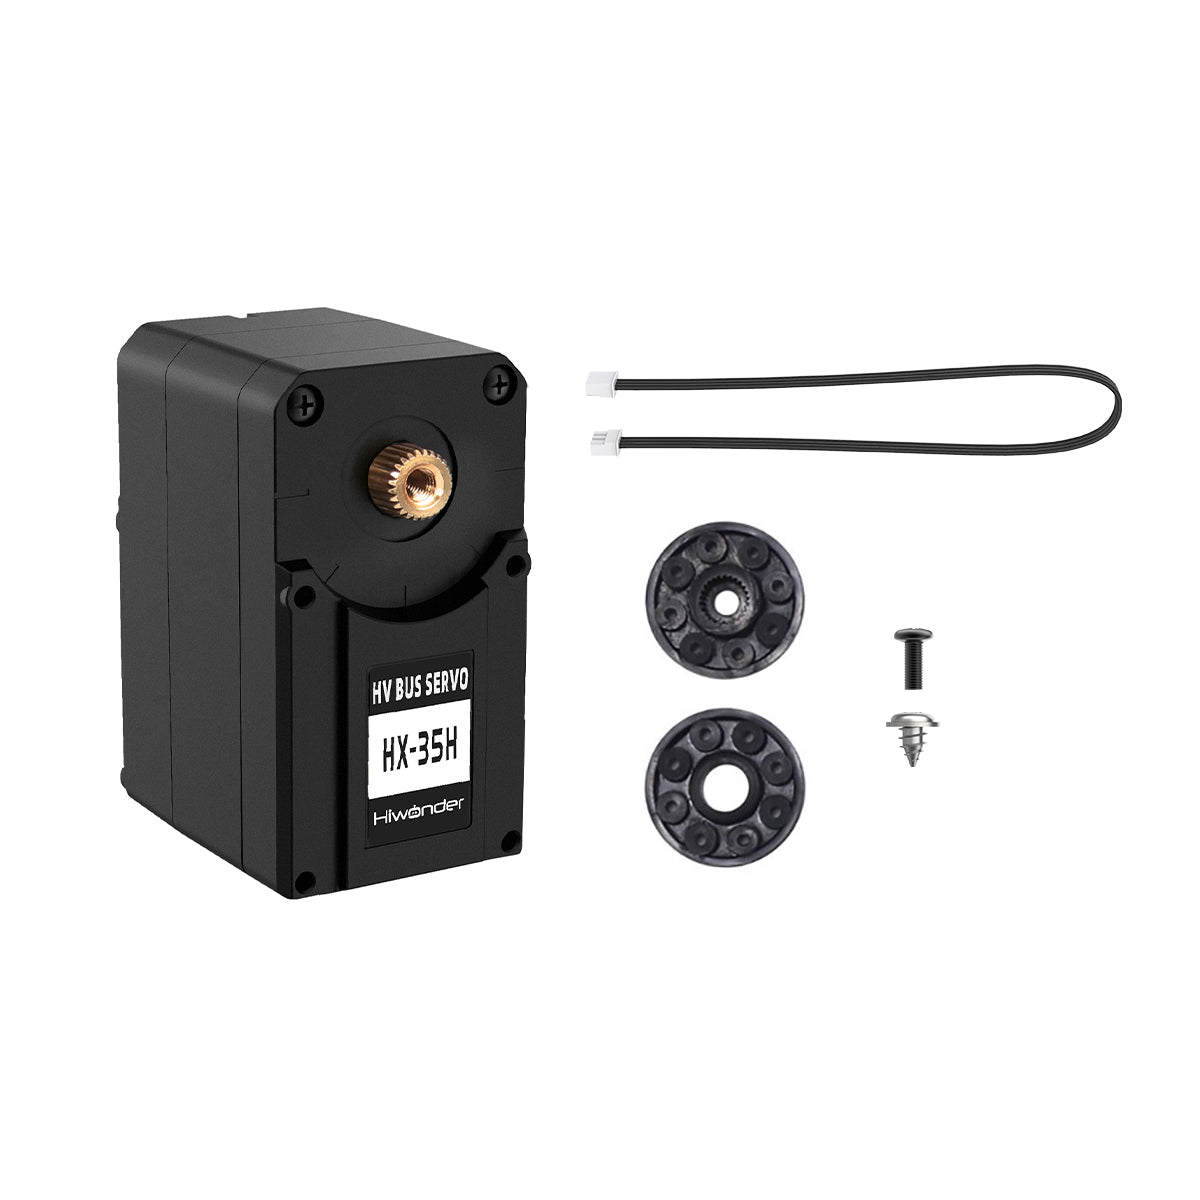 Hiwonder HX-35H Serial Bus High Voltage Servo with Double Shaft, 35KG Strong Torque and Data Feedback Function